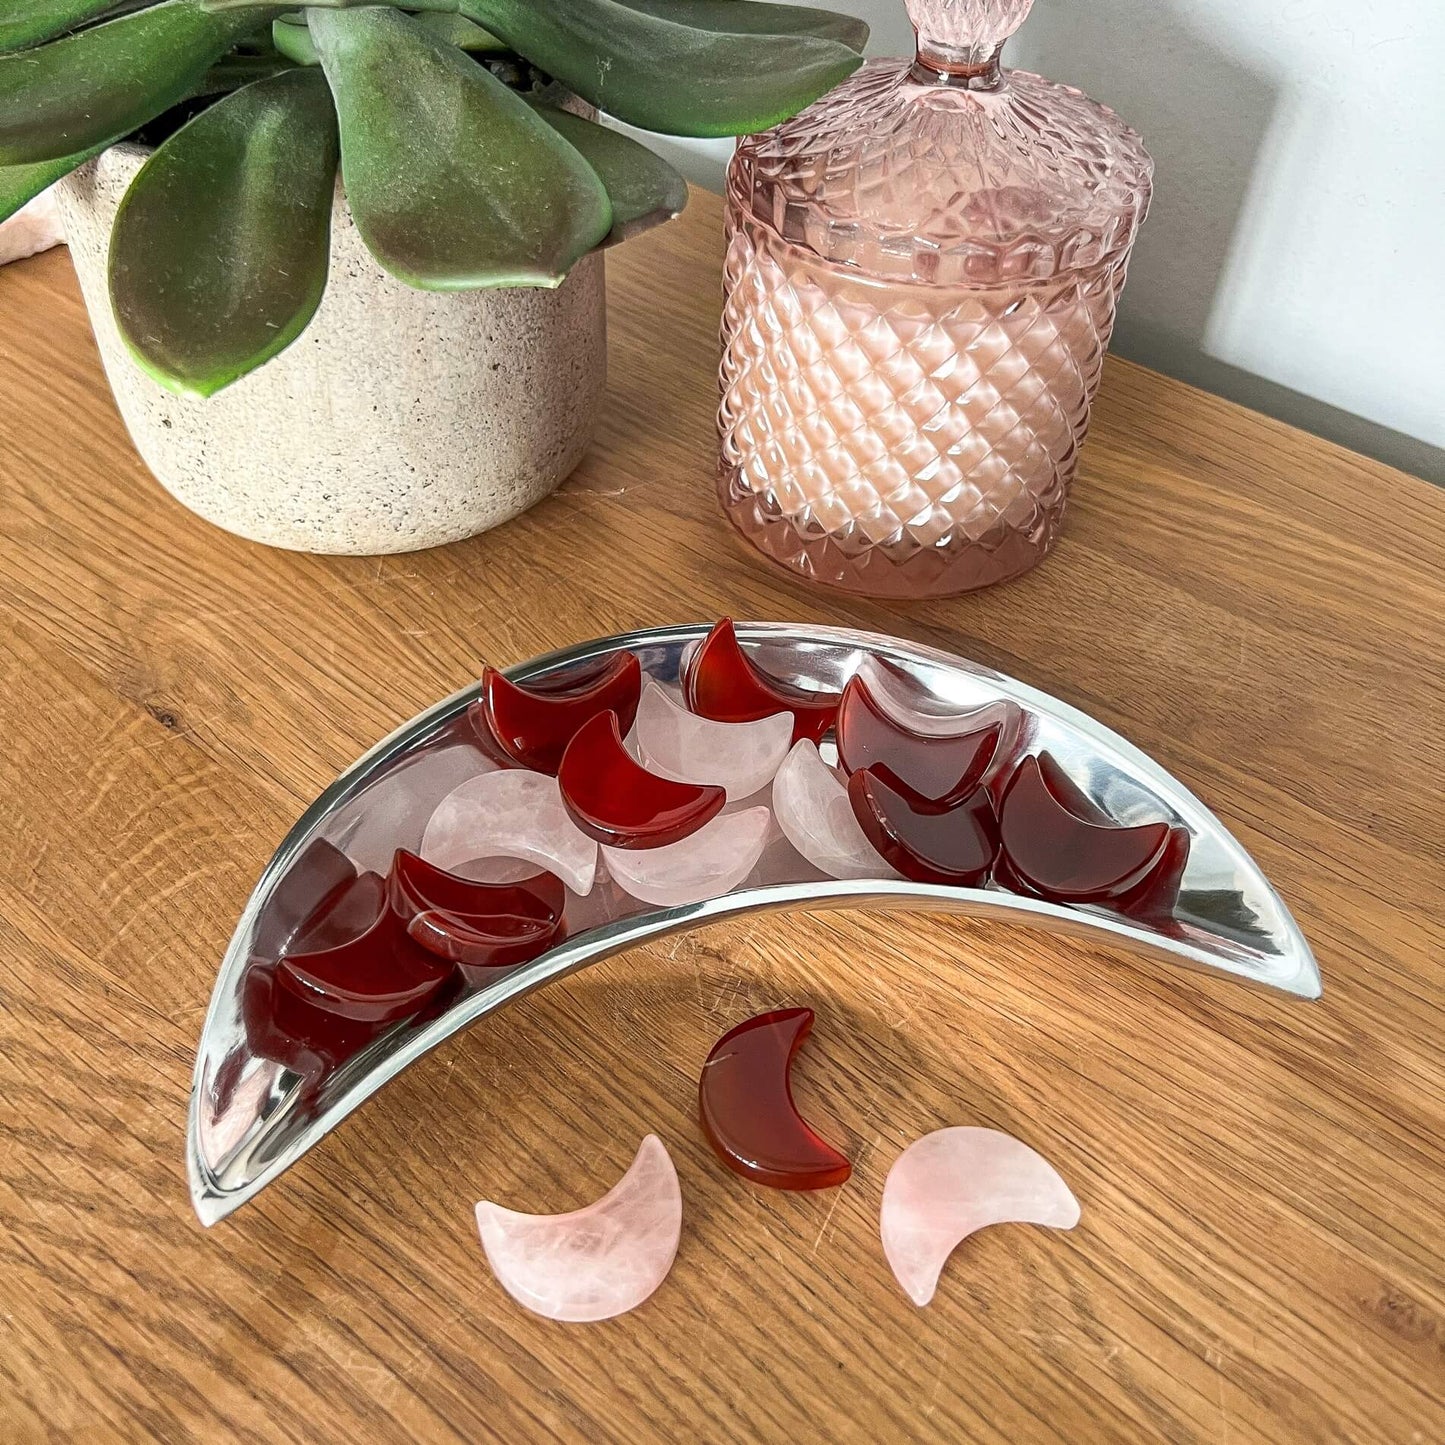 A silver moon dish filled with red carnelian crystal and pink rose quartz crystal moon decorations